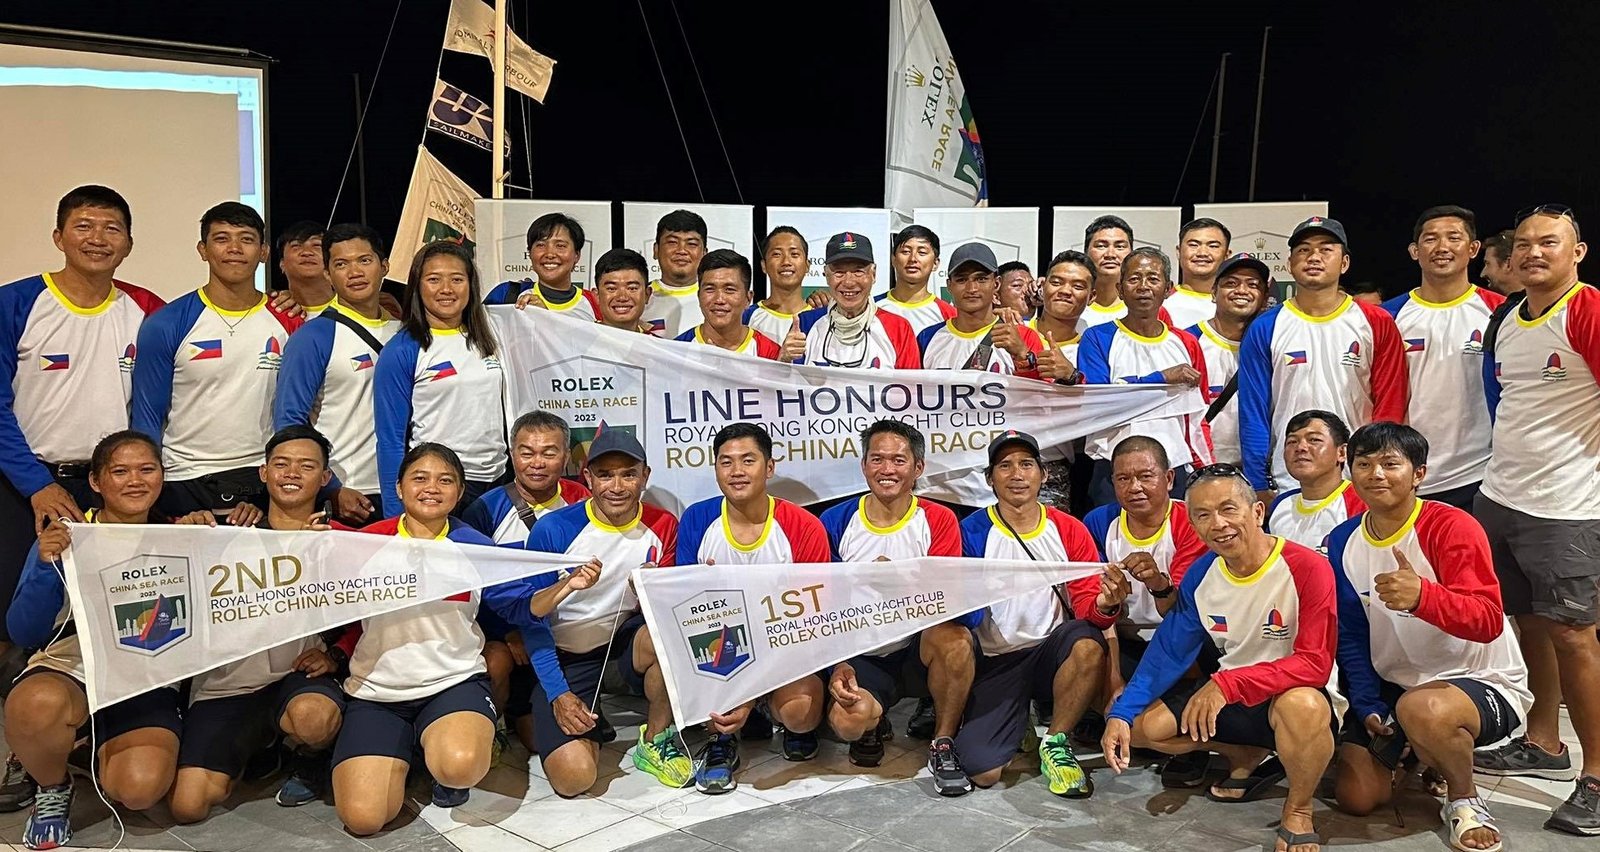 Members of the Standard Insurance Centennial 5 team skippered by Standard Insurance Group Chairman Ernesto “Judes” Echauz (11th from left, standing) dominates the Rolex China Sea Race which started from Victoria Harbour in Hong Kong on Holy Wednesday and finished at Subic Bay on Black Saturday.